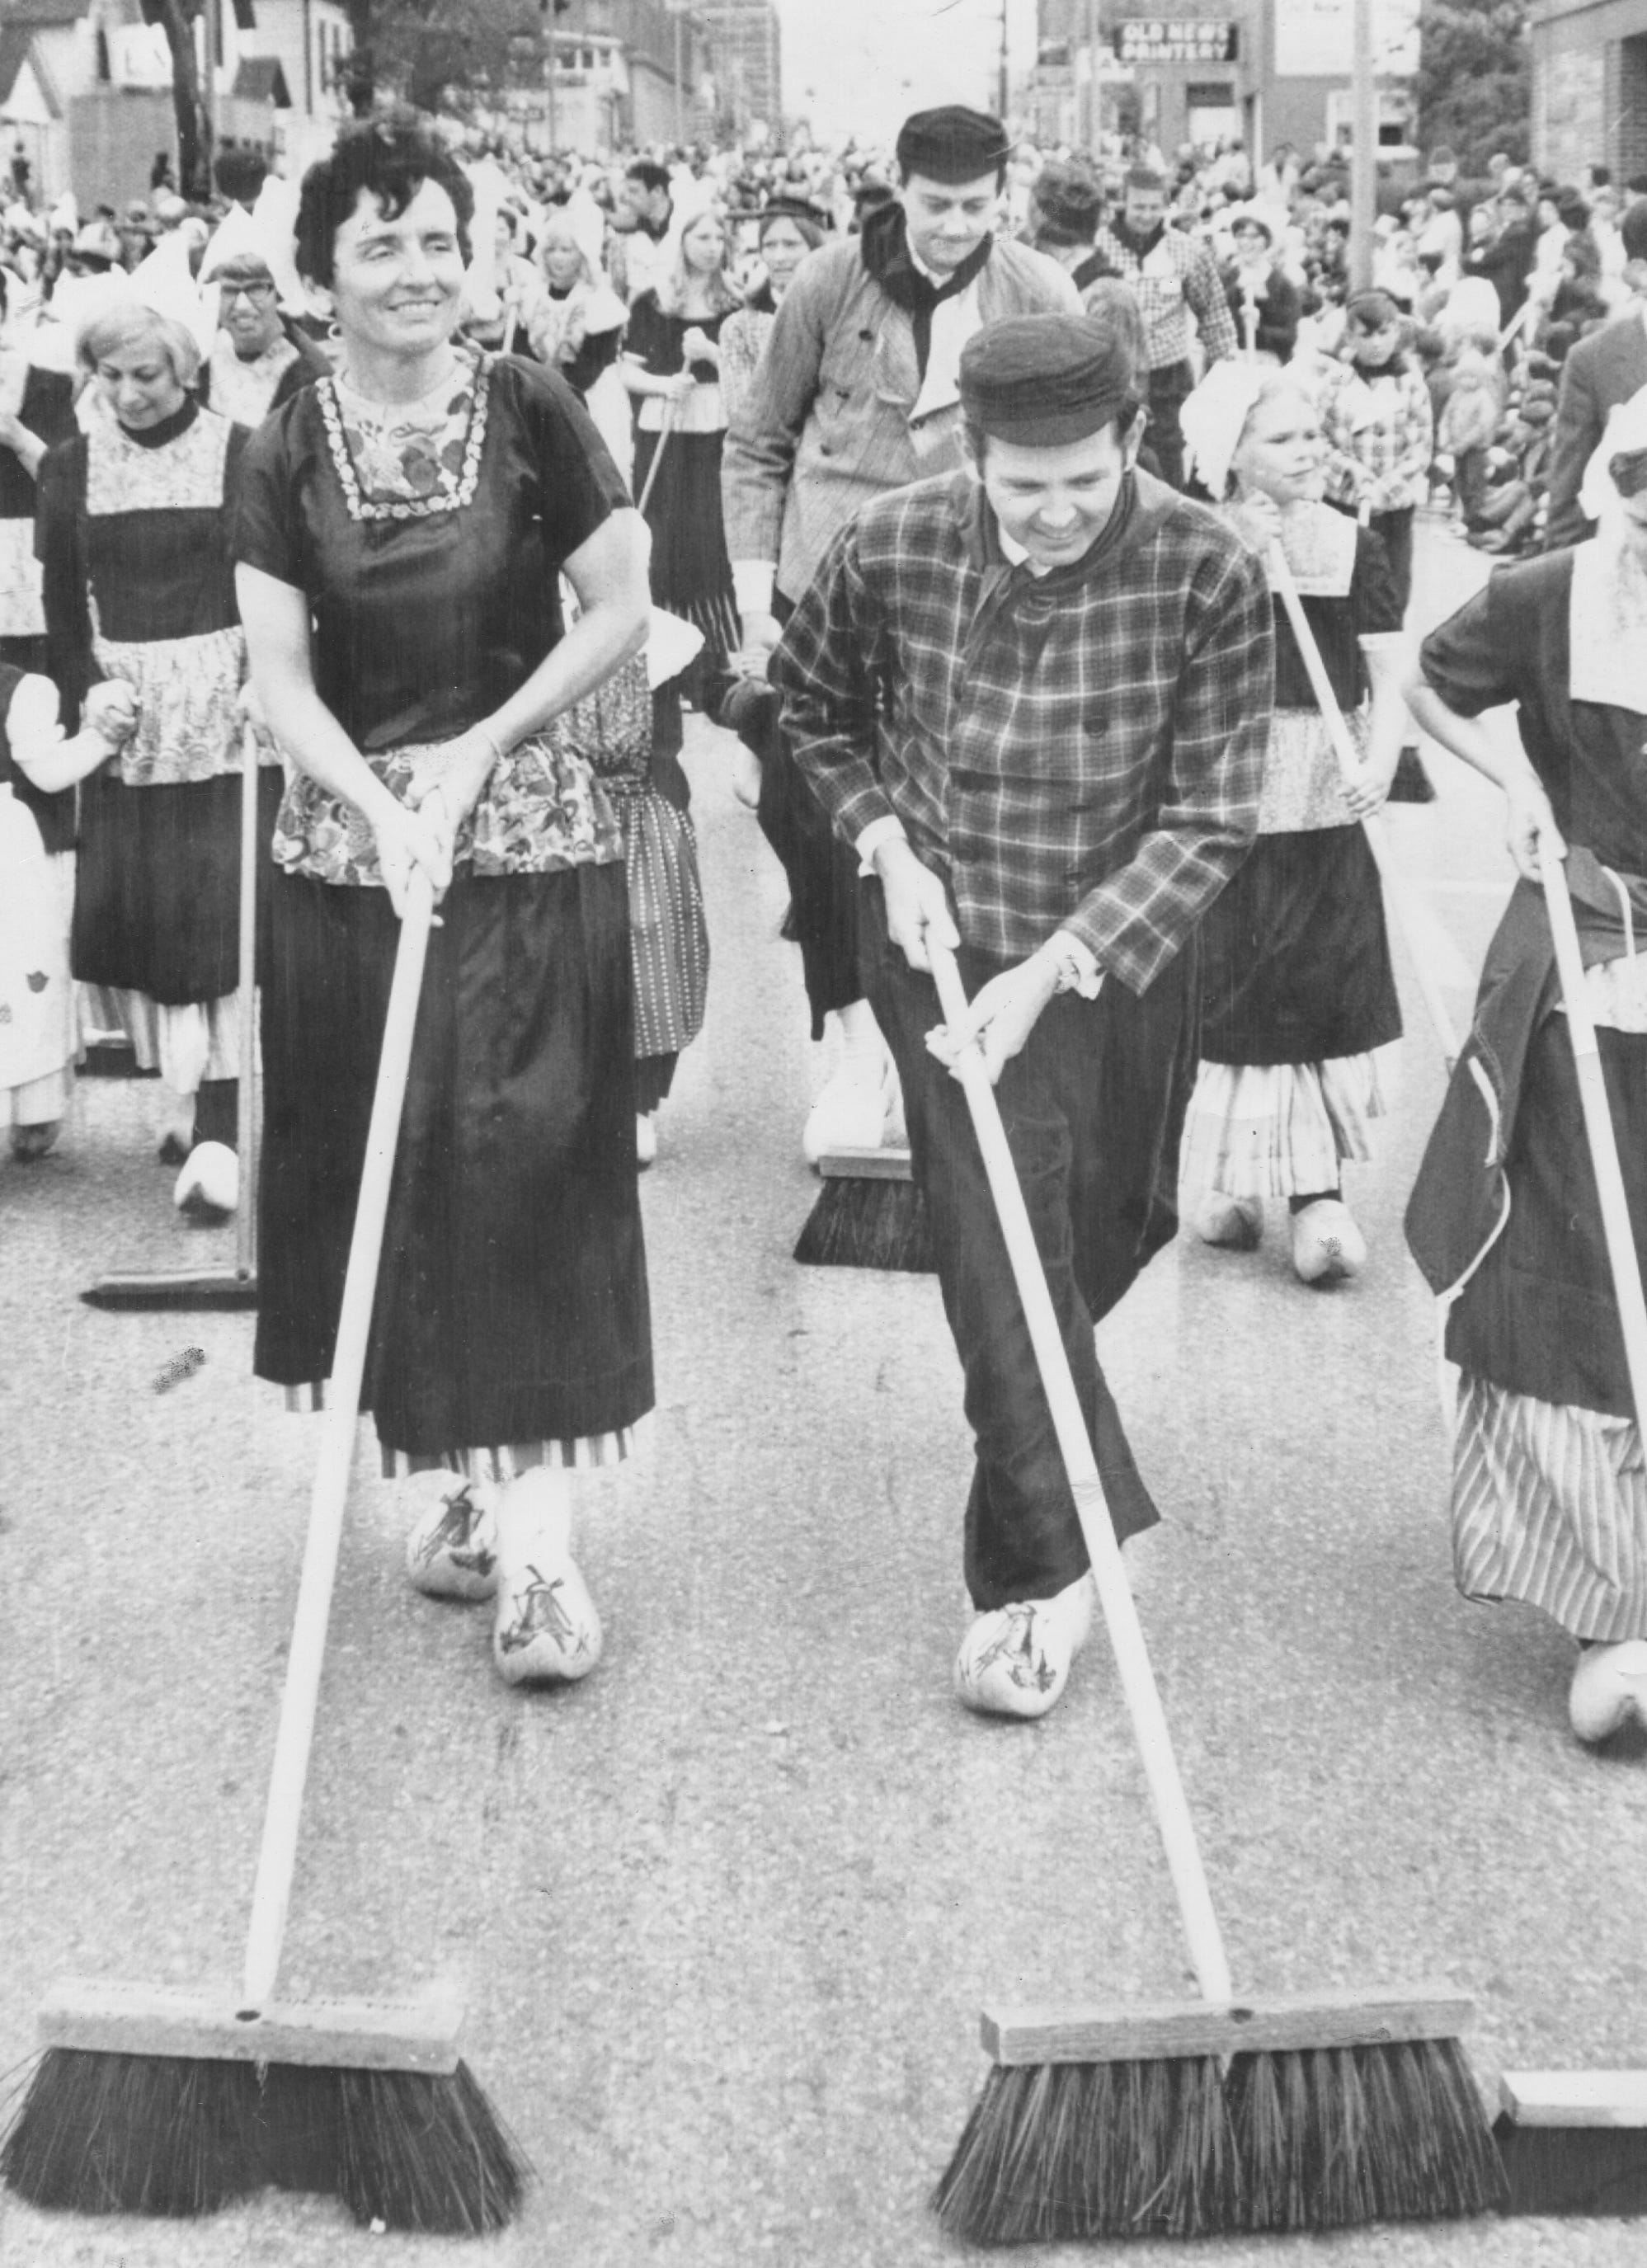 The Millikens continue the tradition of Michigan governors dressing in traditional Dutch clothing and sweeping the street at the Tulip Time Festival in Holland, Michigan in 1978.